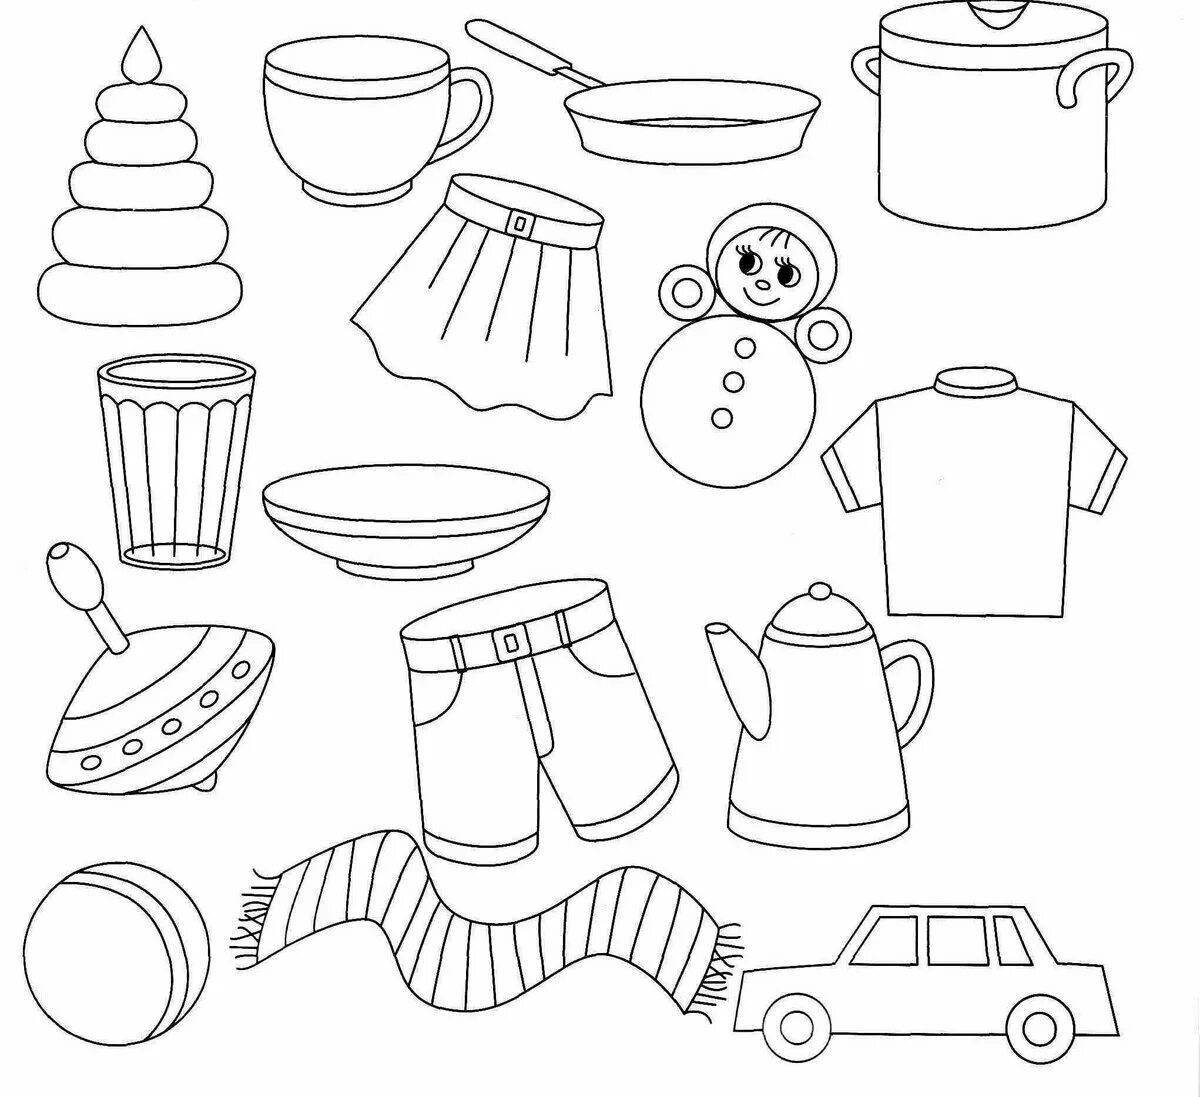 Colorful-great coloring pages for kids